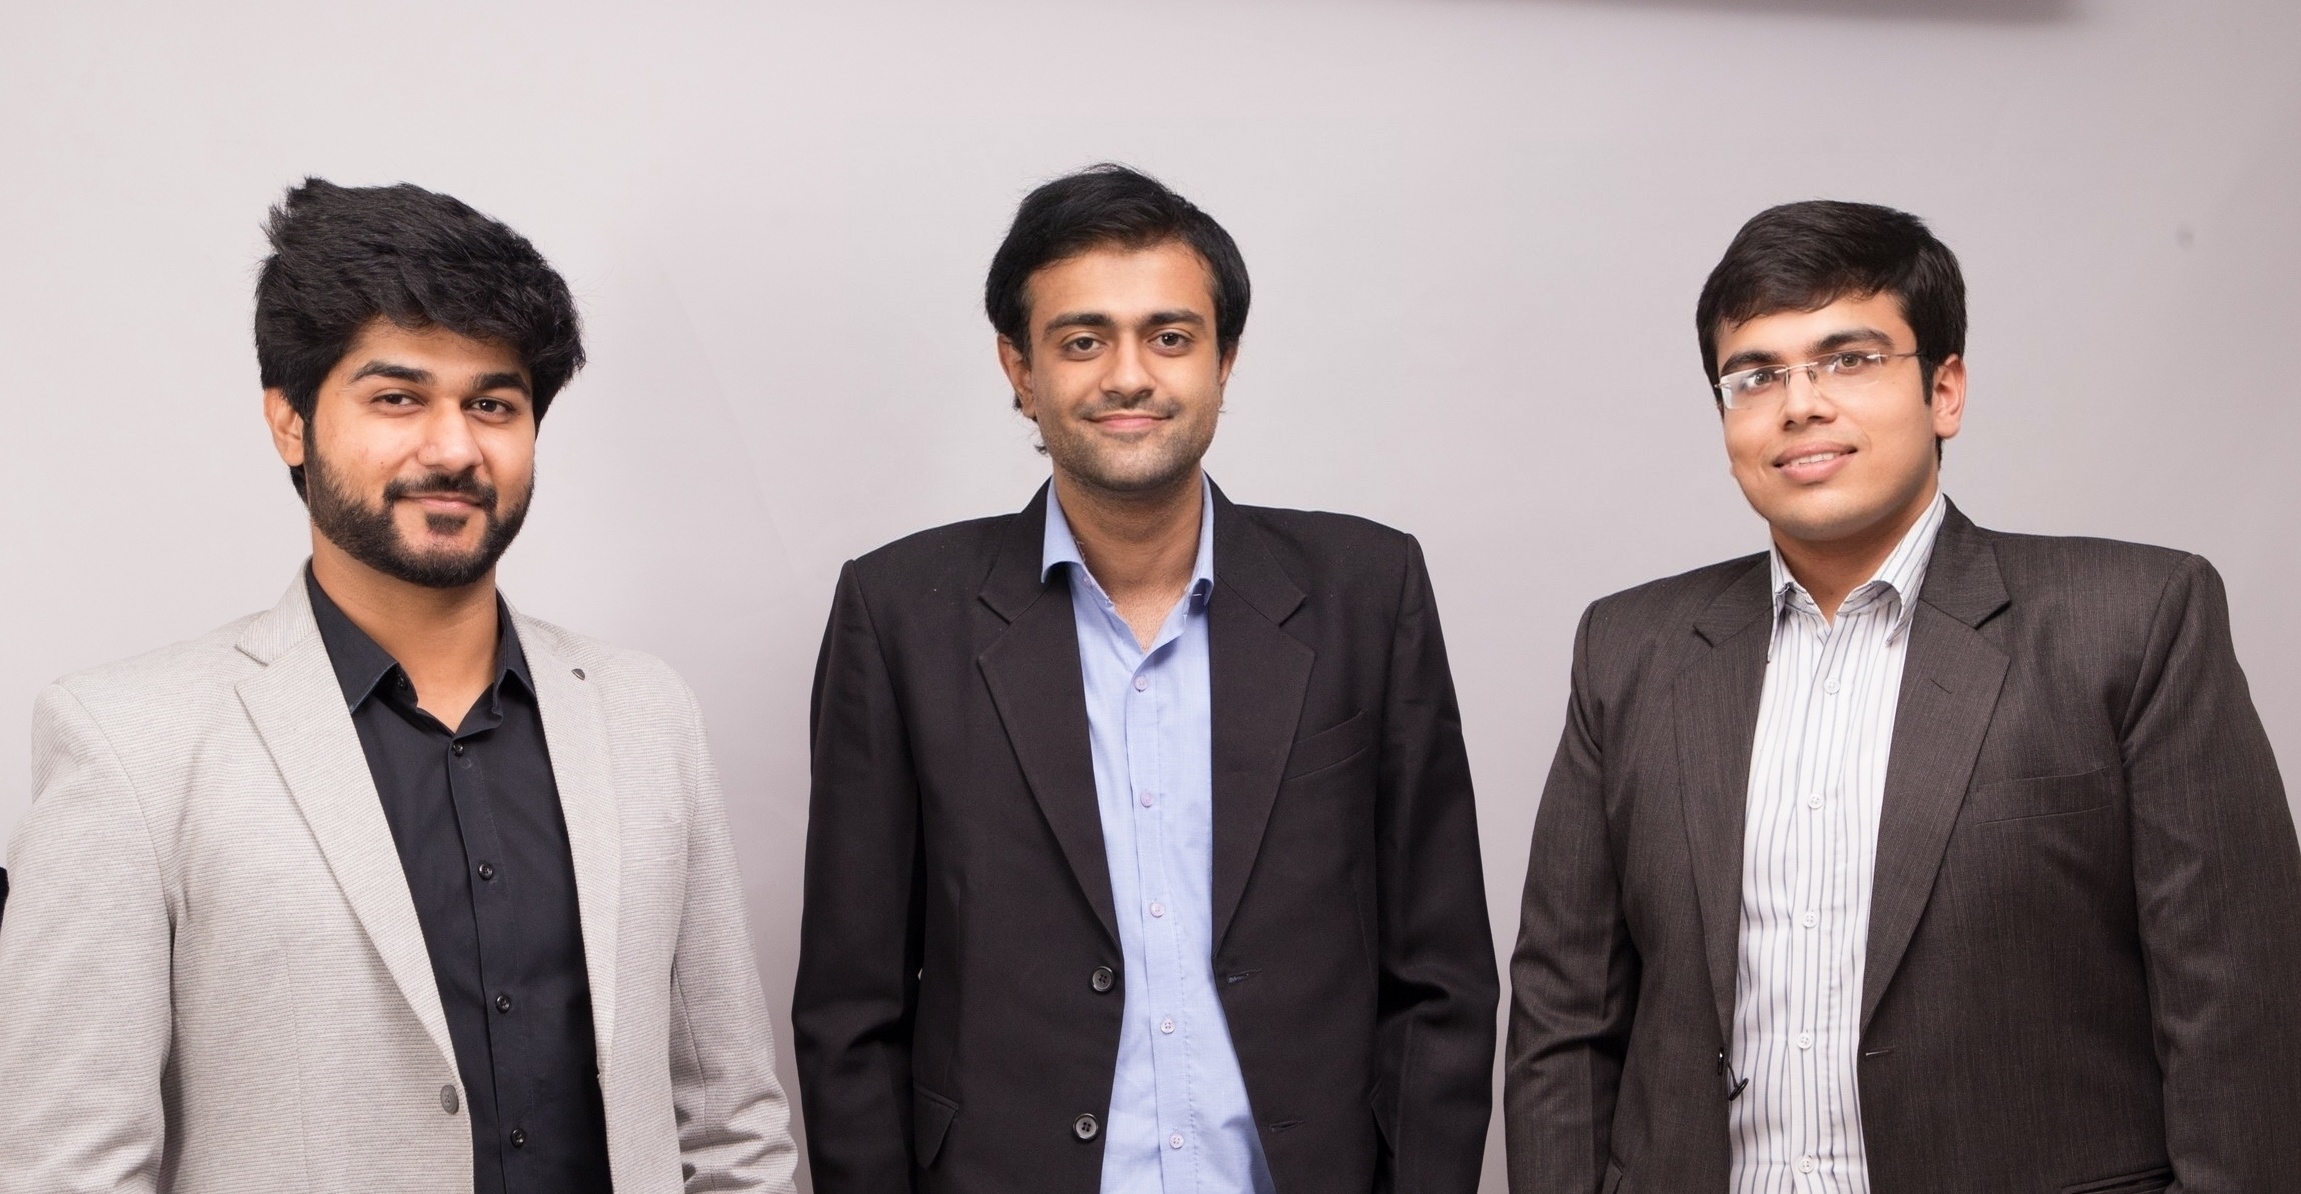 Debt Resolution Startup Credgenics to add 100 Employees across functions to boost growth